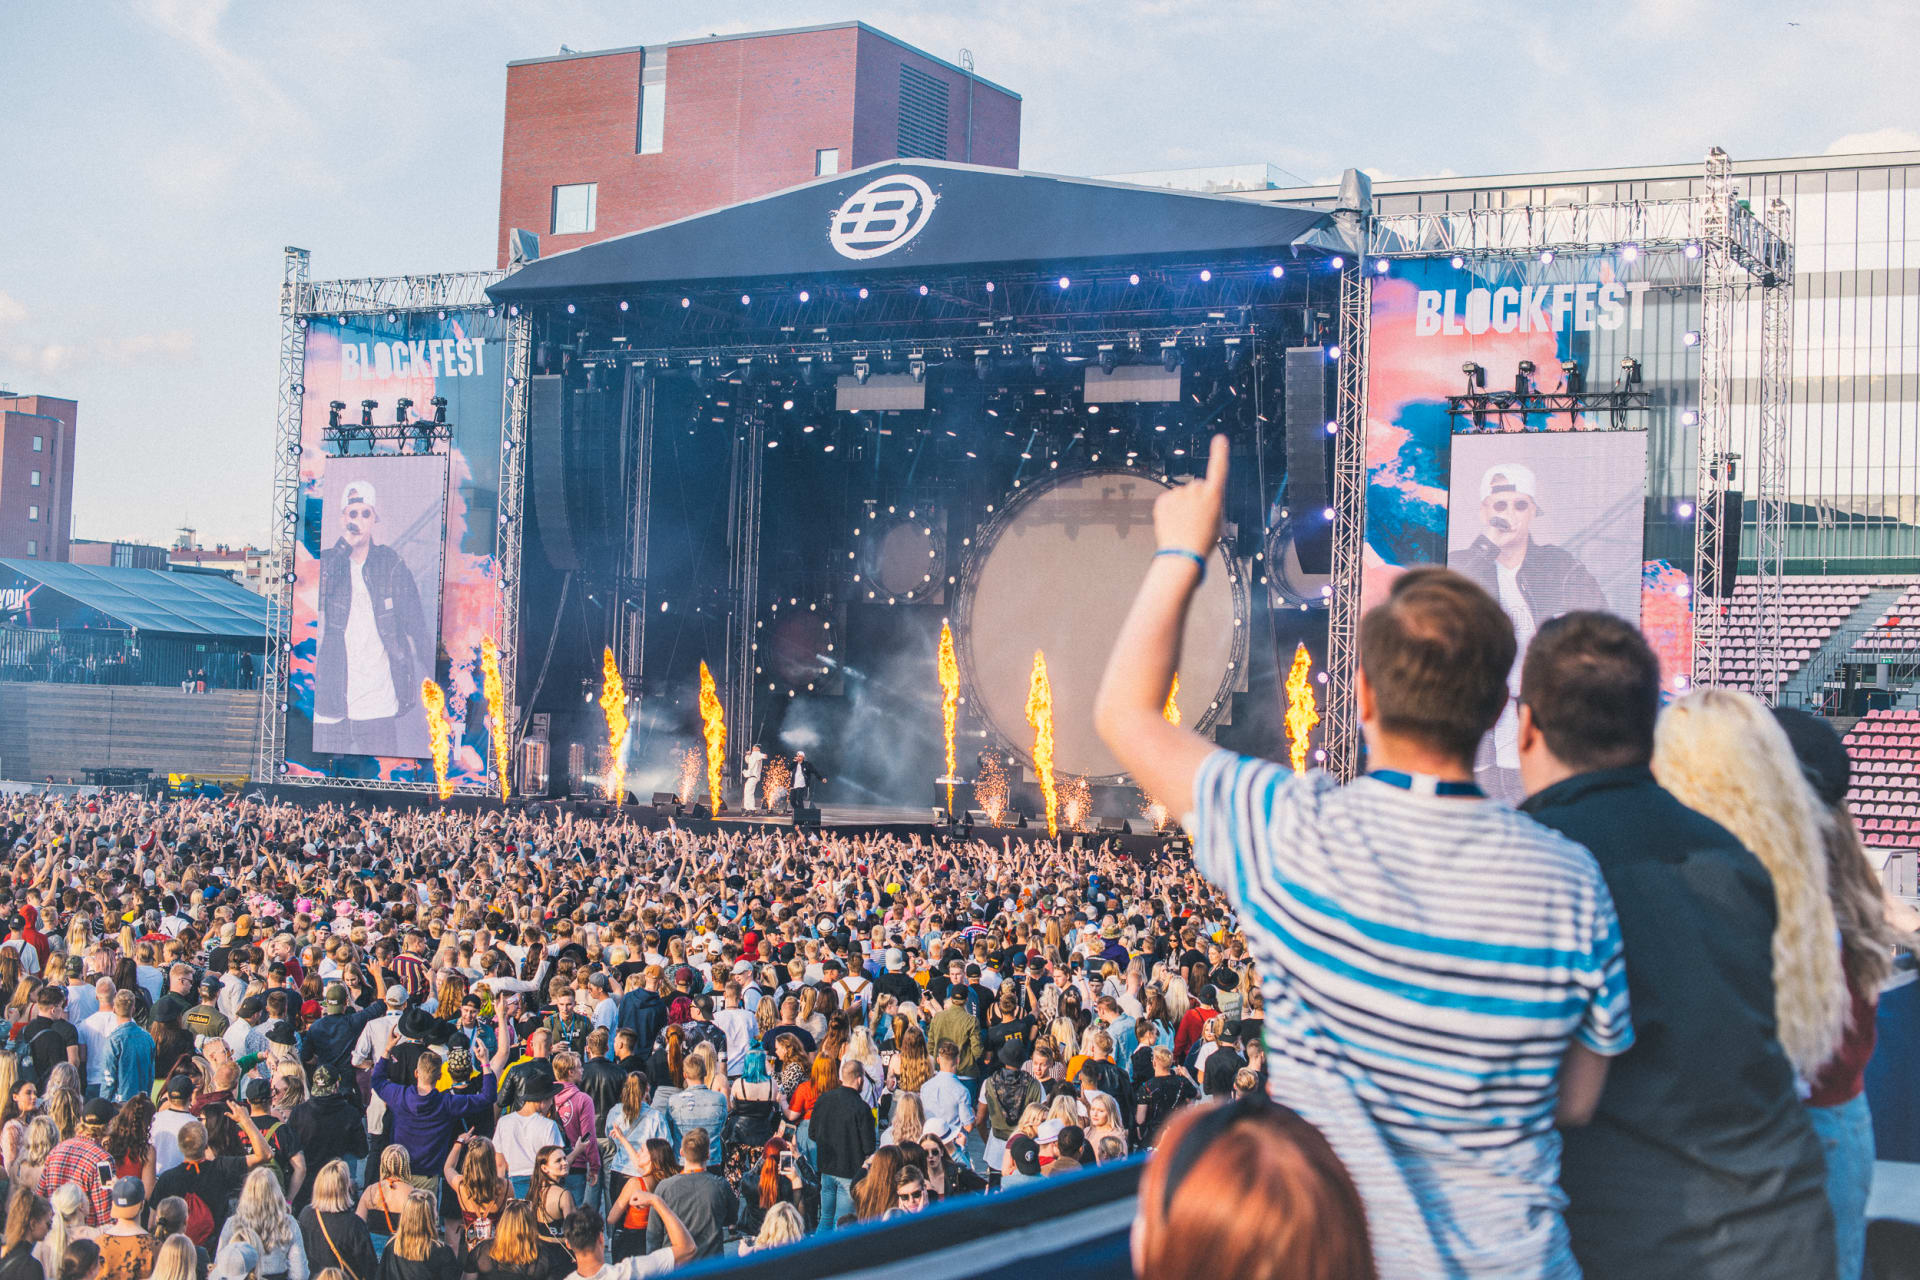 Nordics largest hiphop festival takes place on August 19-20 in Tampere.